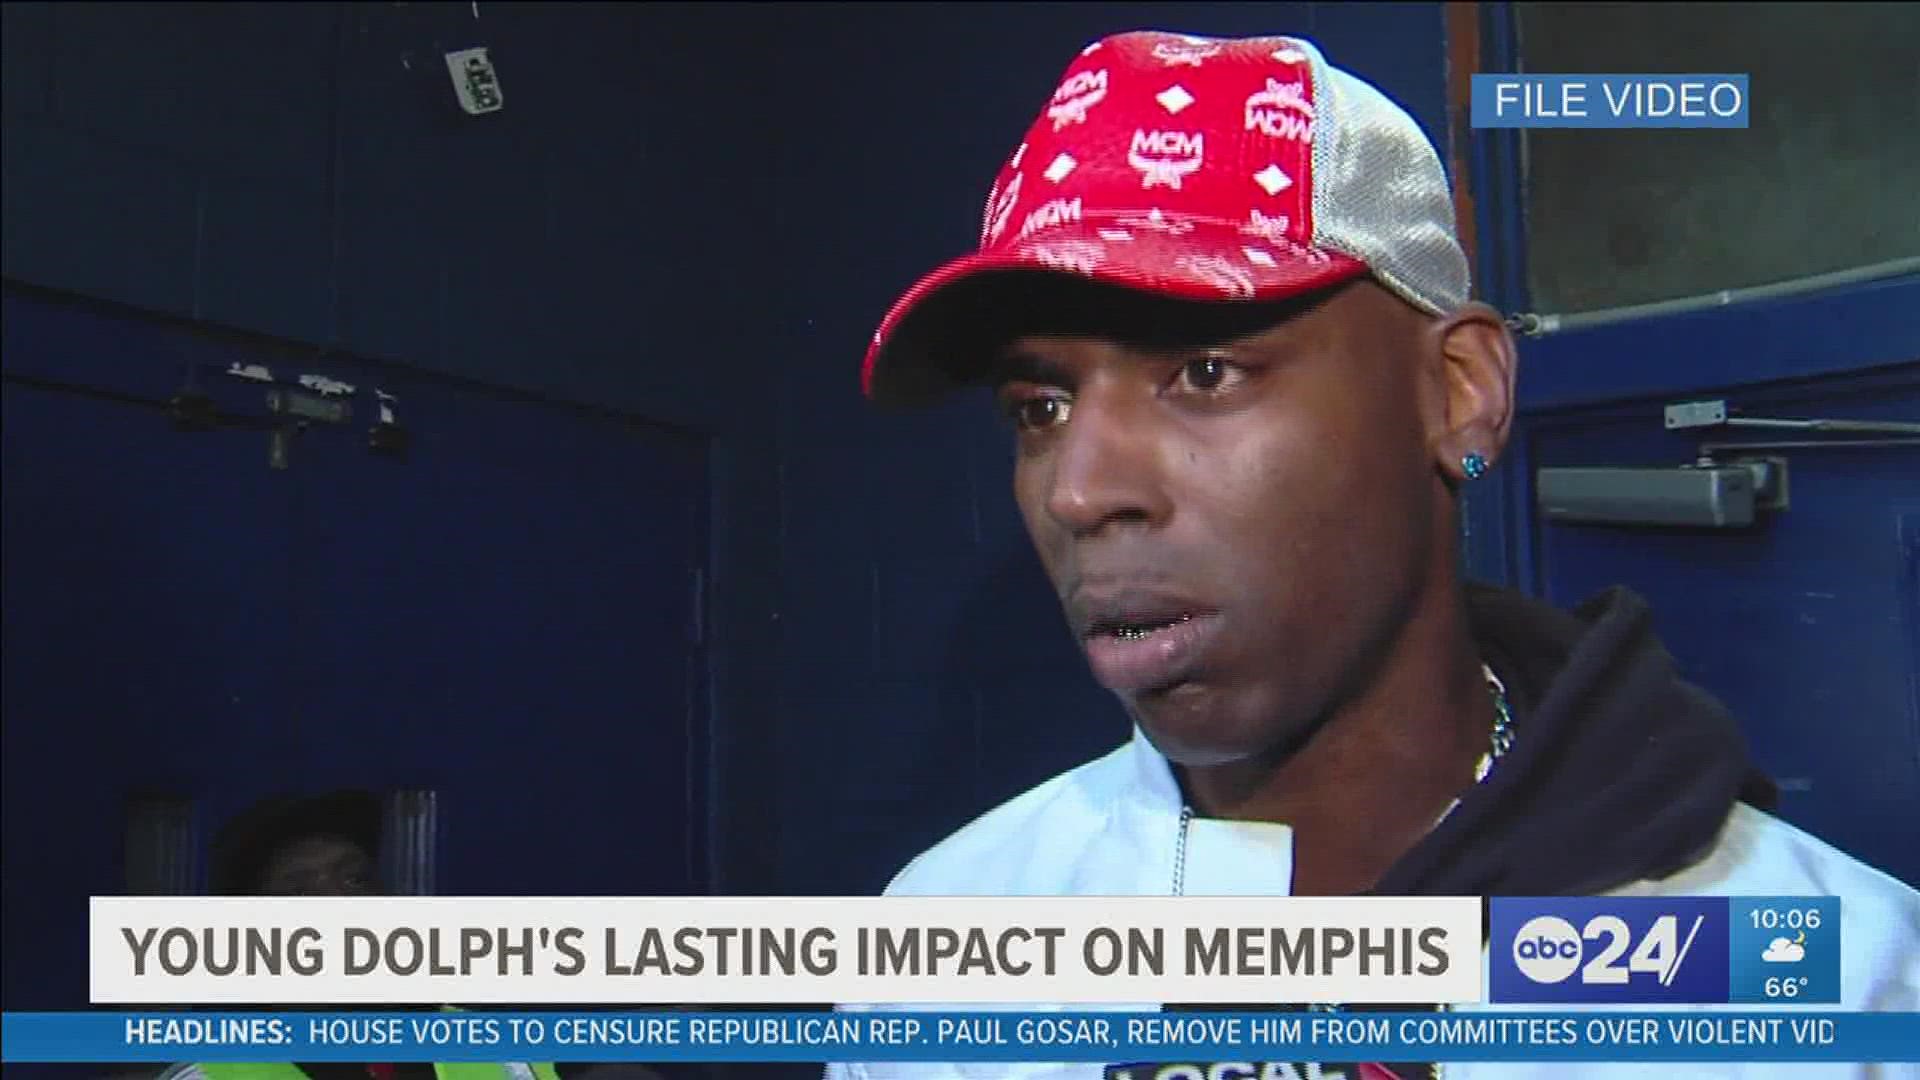 Young Dolph is known across the nation as a rapper but to Memphians, he was much more than that.